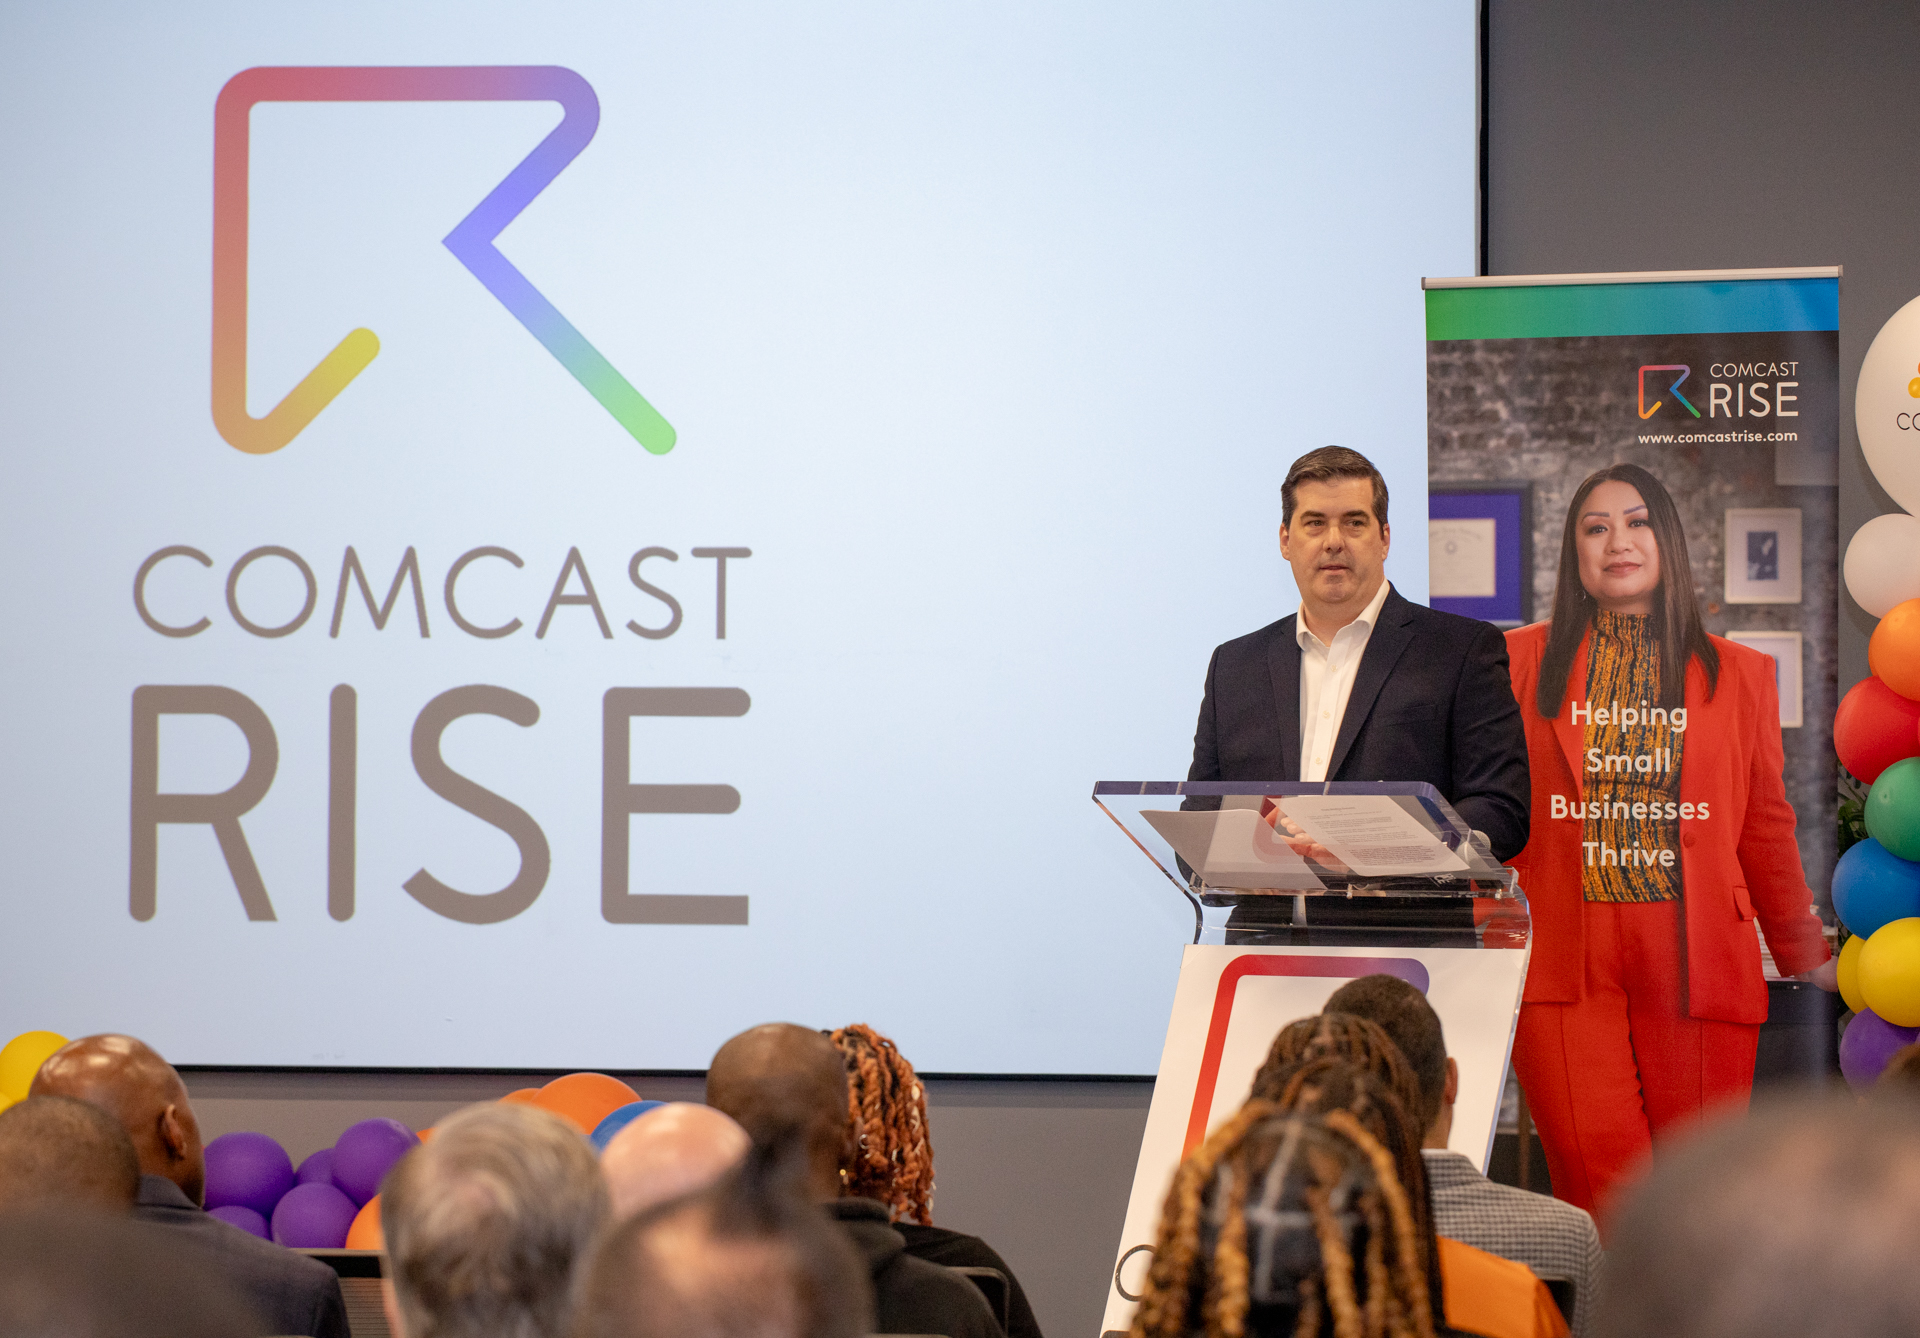 Comcast announces digital equity initiatives designed to give Atlantans “Unlimited Possibilities”  